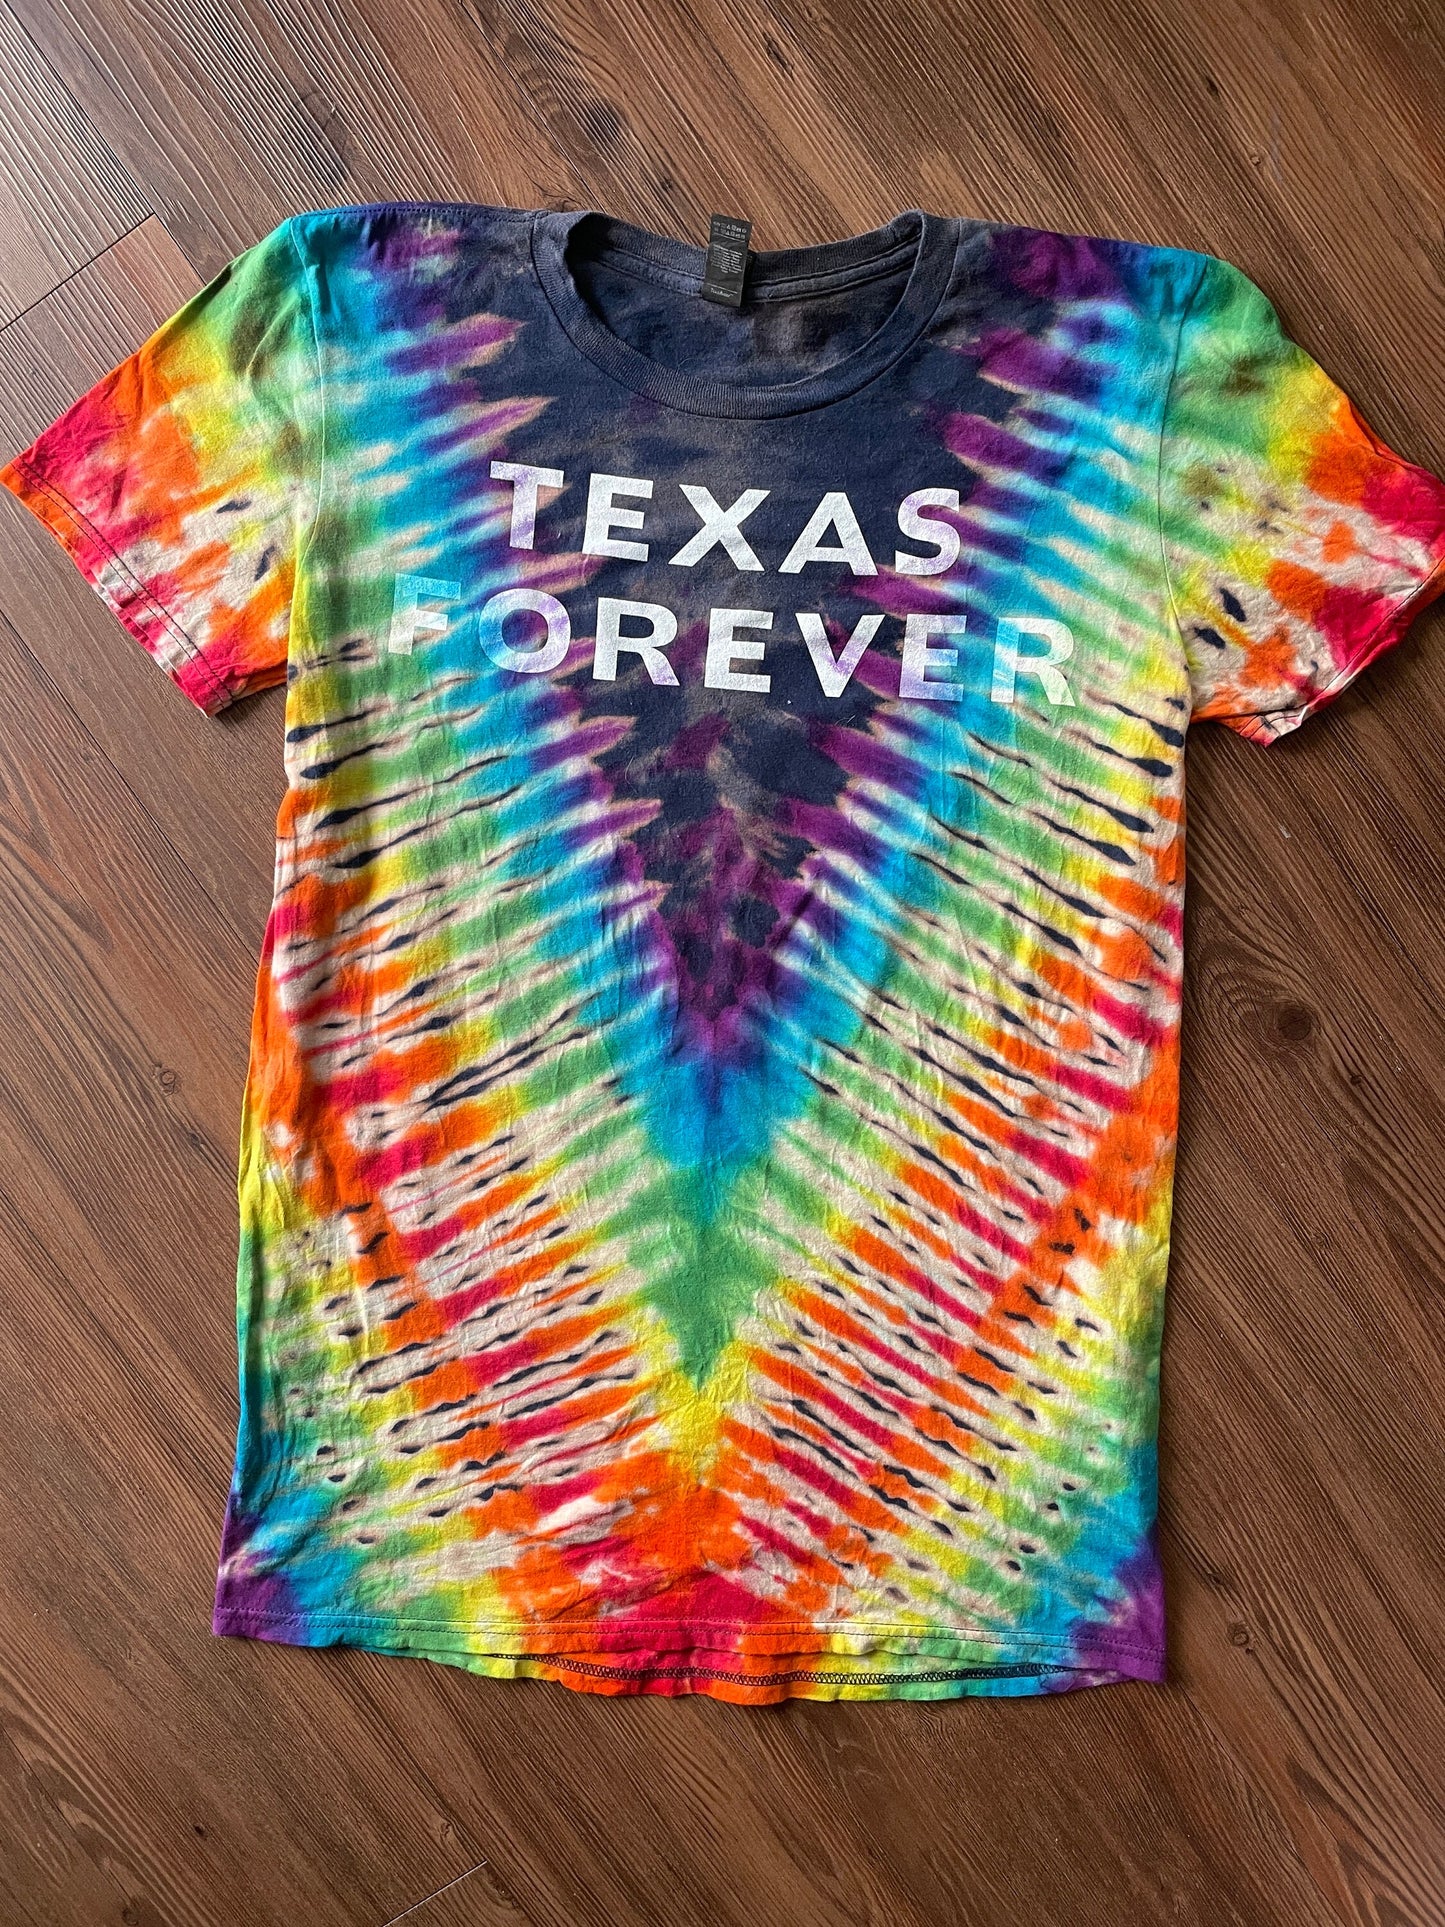 Texas Forever Reverse Tie Dye t-shirt | Friday Night Lights Rainbow Bleach Dye Short Sleeve Top Size Medium | Upcycled & Tie Dyed by Hand